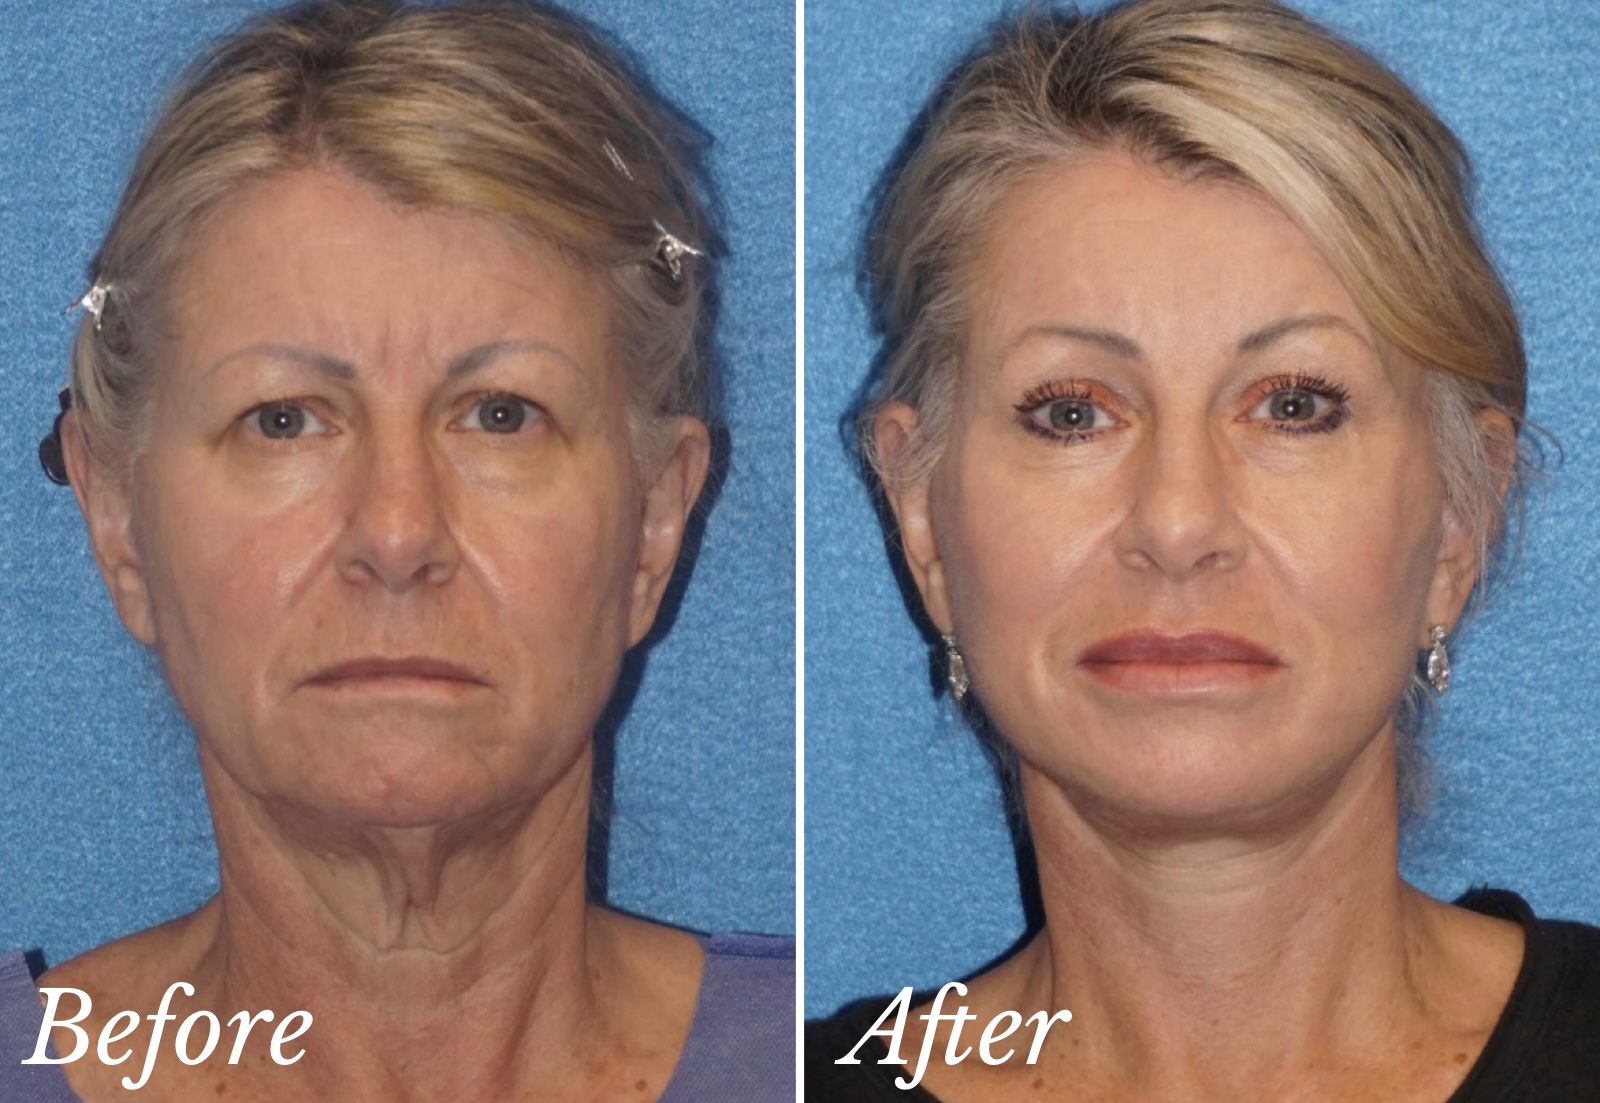 Plastic surgery before and after photo against a blue background.